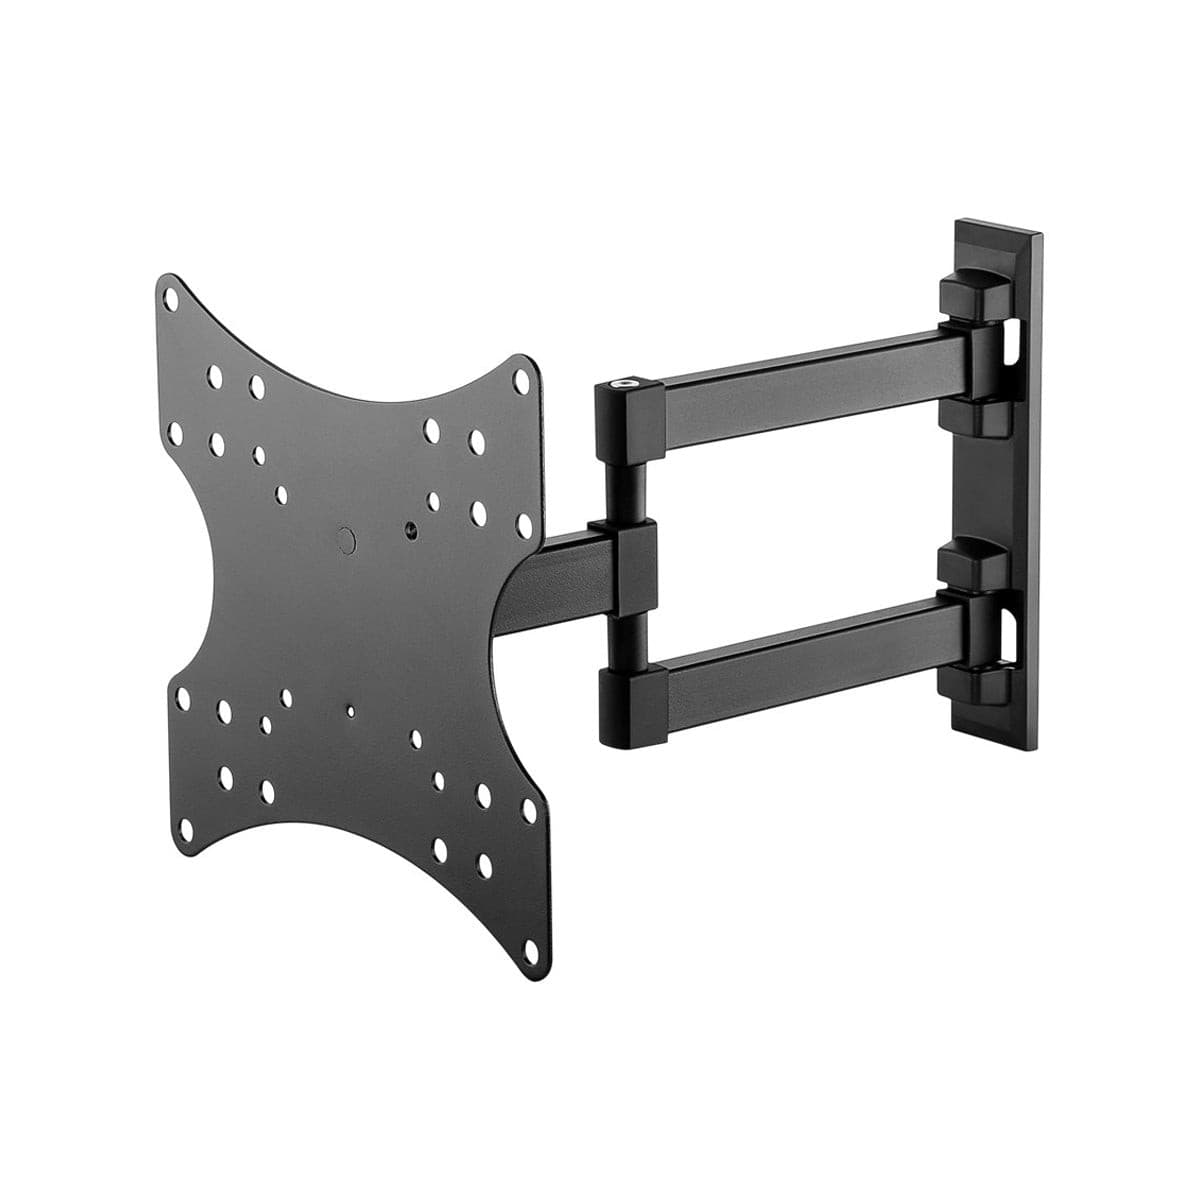 Goobay TV and Monitor Wall Mount Fullmotion S3 Double Arm Advanced for TVs (23 - 42